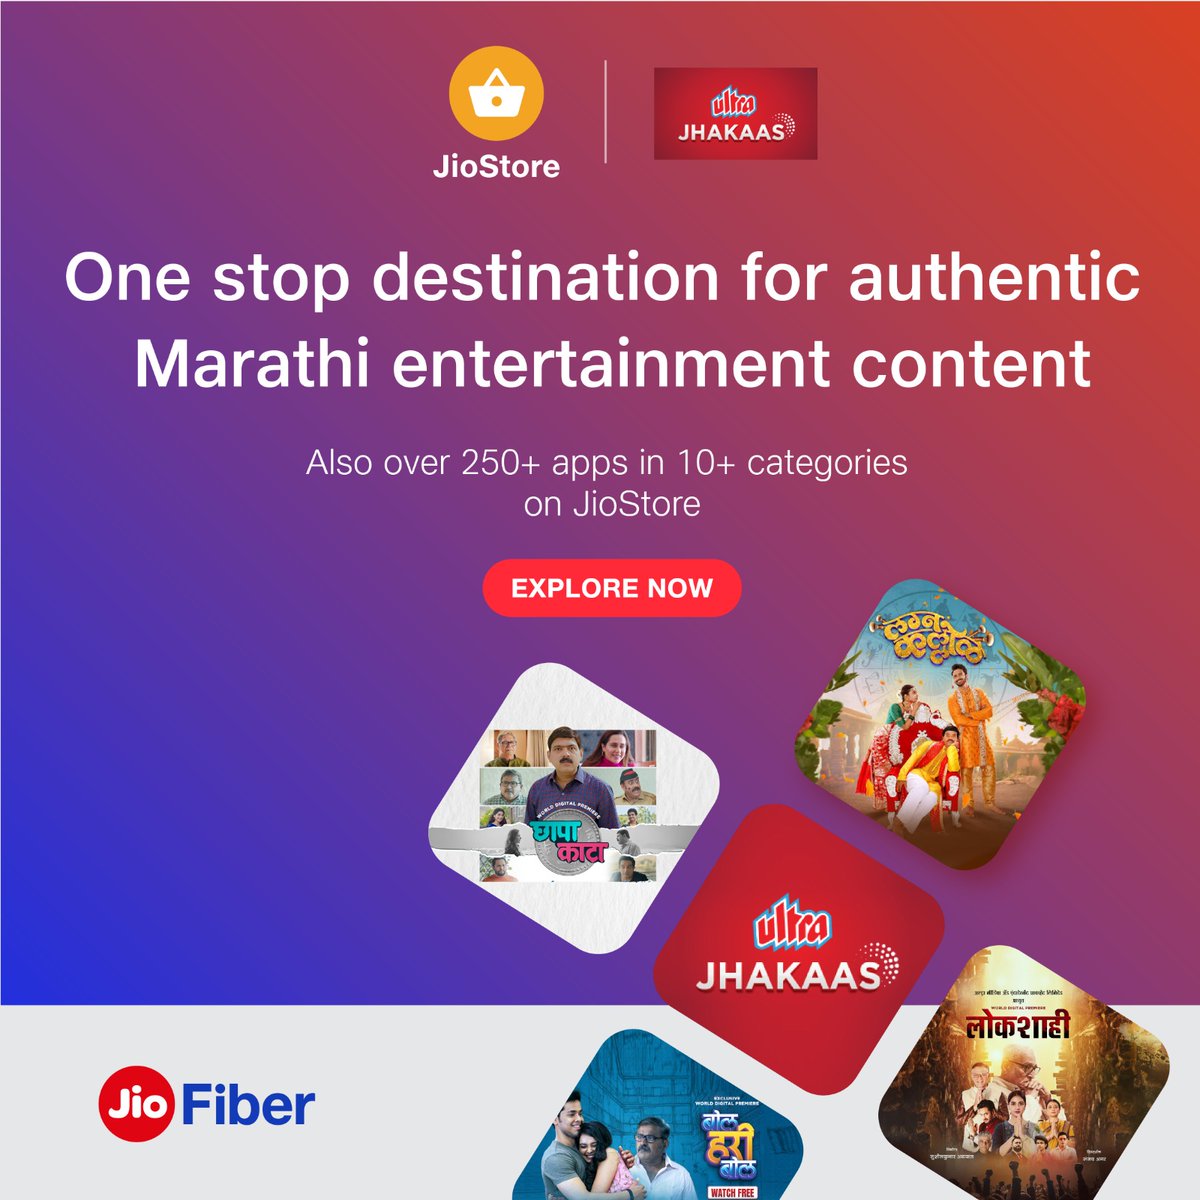 Check out today & enjoy amazing Entertainment Apps on JioStore via your JioFiber plans.  

@ultrajhakaas destination for 100% Marathi entertainment, with 2000 hours of exclusive content.  

#Jio #JioDevelopers #JioStore #UltraJhakaas #SolveForBillions #BuildforBharat